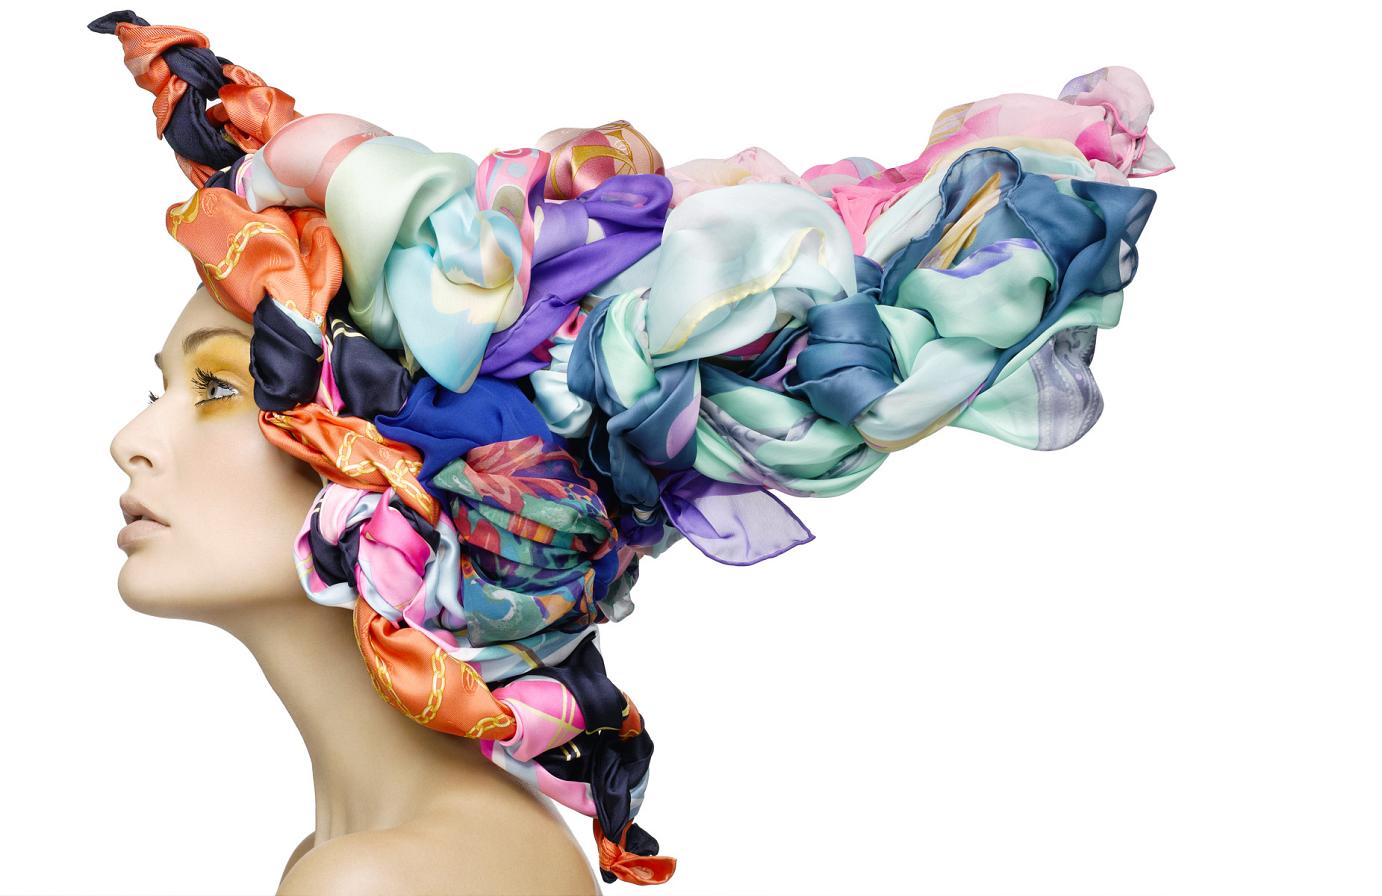 CoqCreative power by ProductionLink s.r.l. Tous-Les-Foulards Tous-Les-Foulards  Tous-Les-Foulards